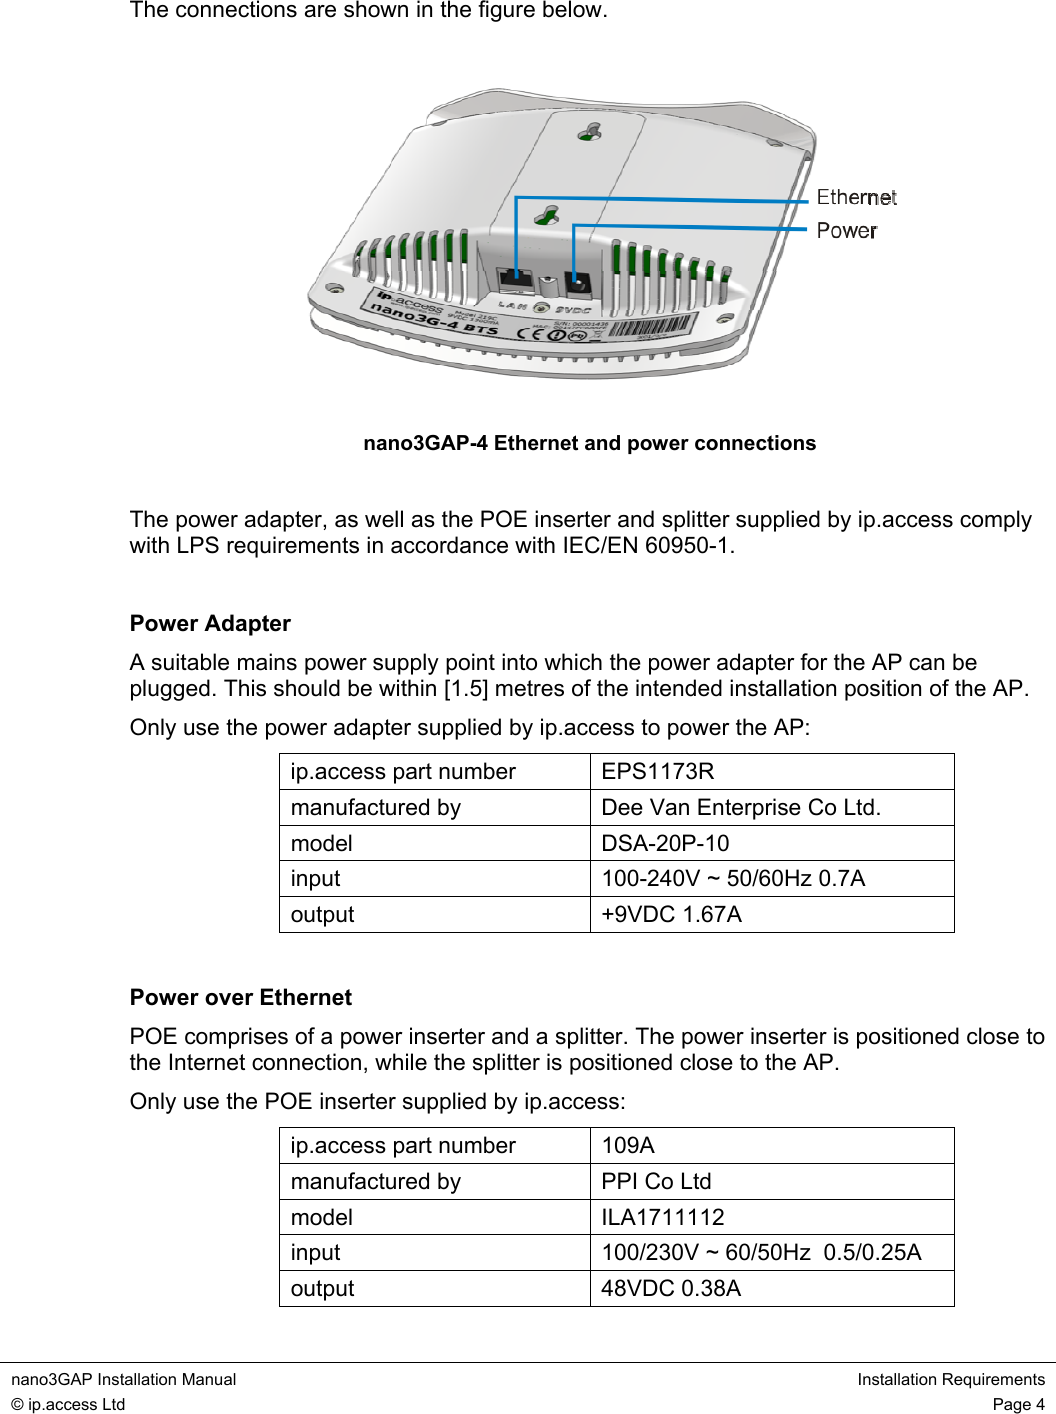  nano3GAP Installation Manual  Installation Requirements © ip.access Ltd  Page 4  The connections are shown in the figure below.  nano3GAP-4 Ethernet and power connections  The power adapter, as well as the POE inserter and splitter supplied by ip.access comply with LPS requirements in accordance with IEC/EN 60950-1.  Power Adapter A suitable mains power supply point into which the power adapter for the AP can be plugged. This should be within [1.5] metres of the intended installation position of the AP. Only use the power adapter supplied by ip.access to power the AP: ip.access part number  EPS1173R manufactured by  Dee Van Enterprise Co Ltd. model DSA-20P-10 input  100-240V ~ 50/60Hz 0.7A output +9VDC 1.67A  Power over Ethernet POE comprises of a power inserter and a splitter. The power inserter is positioned close to the Internet connection, while the splitter is positioned close to the AP. Only use the POE inserter supplied by ip.access: ip.access part number  109A manufactured by  PPI Co Ltd model ILA1711112 input  100/230V ~ 60/50Hz  0.5/0.25A output 48VDC 0.38A 